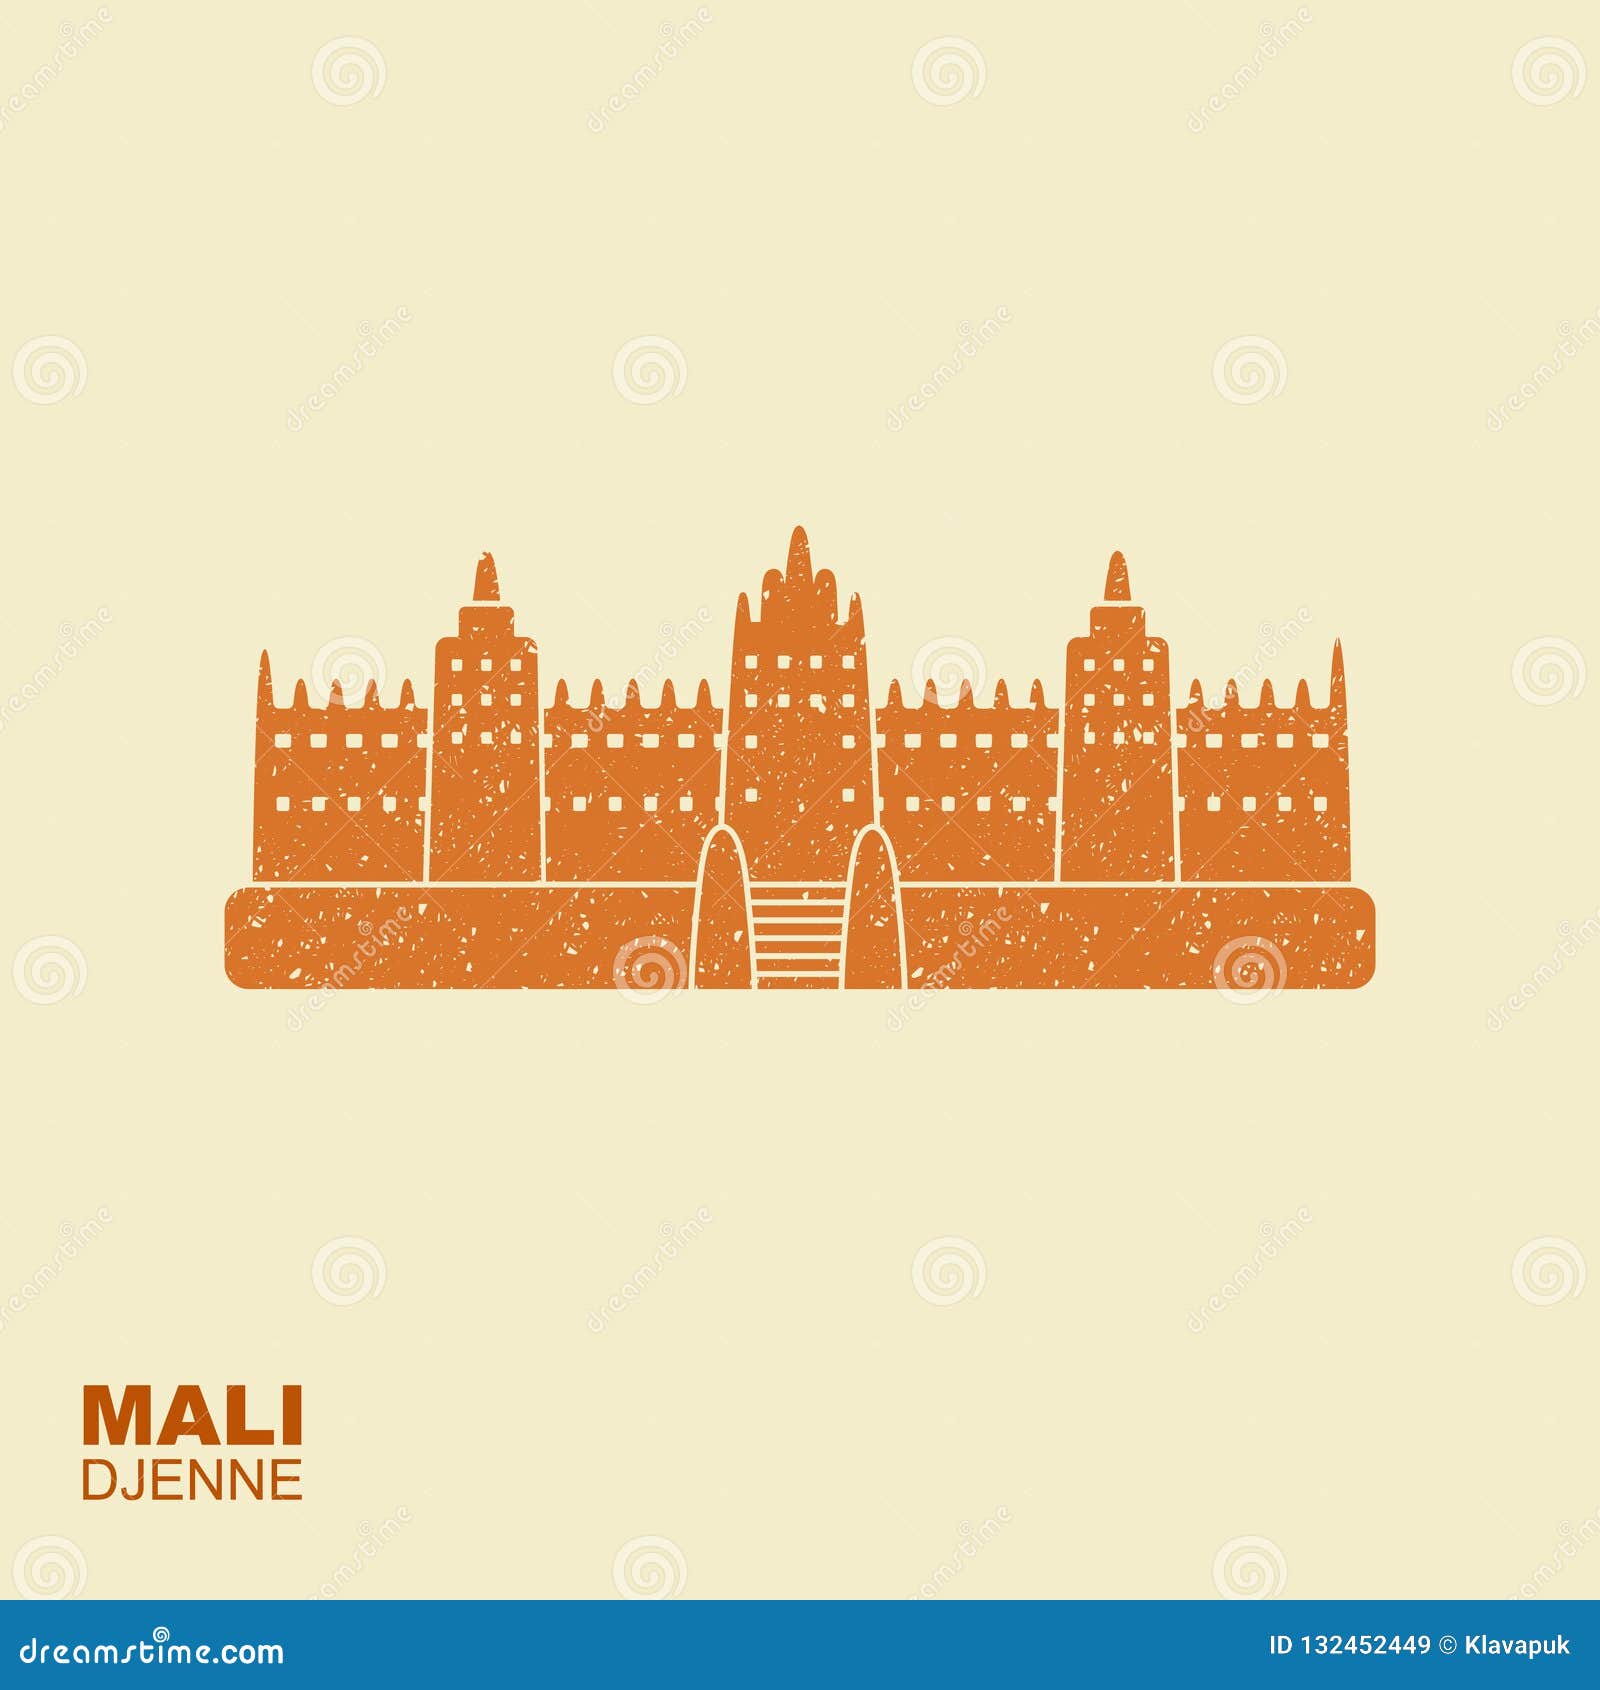 djenne great mosque in farmantala in mali. flat icon sight showplace attraction with scuffed effect